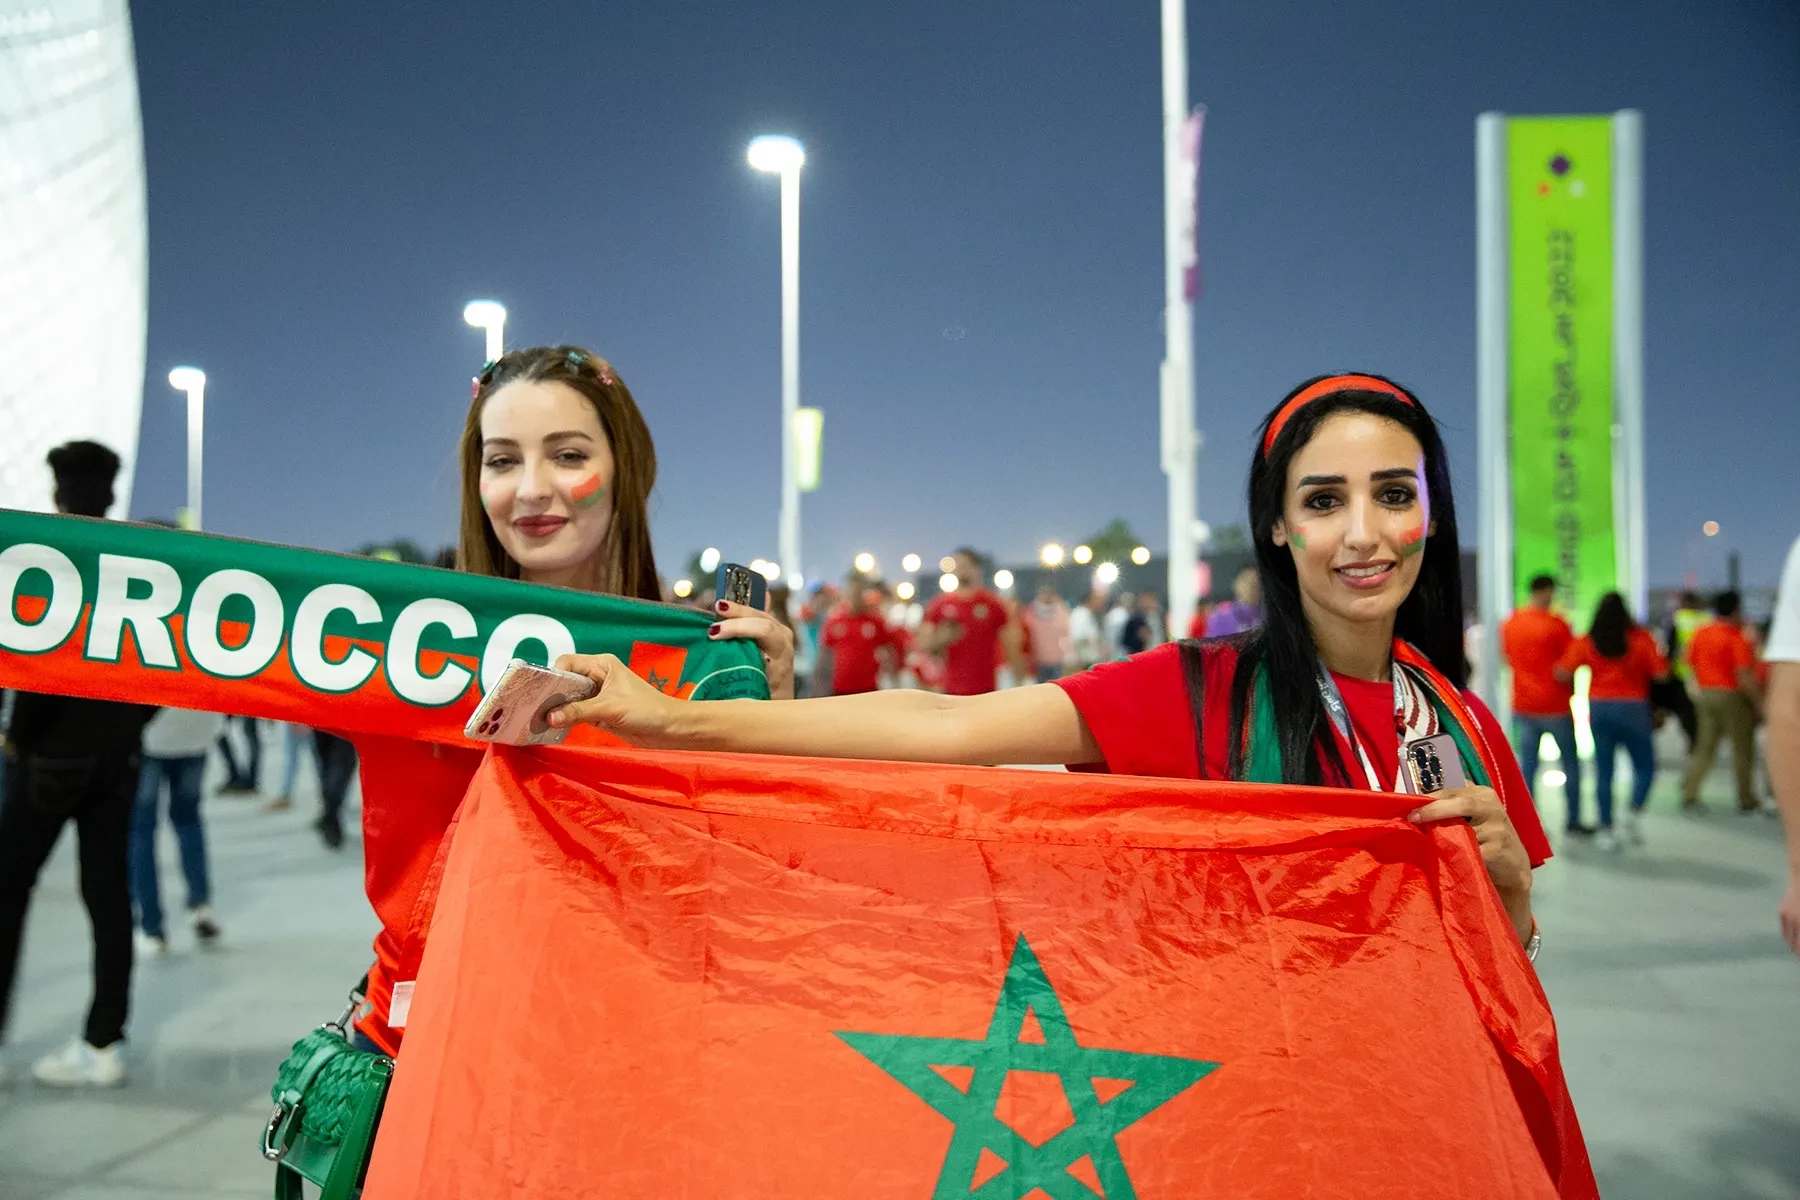 Co-hosts Morocco and Spain on collision course over final venue at FIFA 2030 World Cup